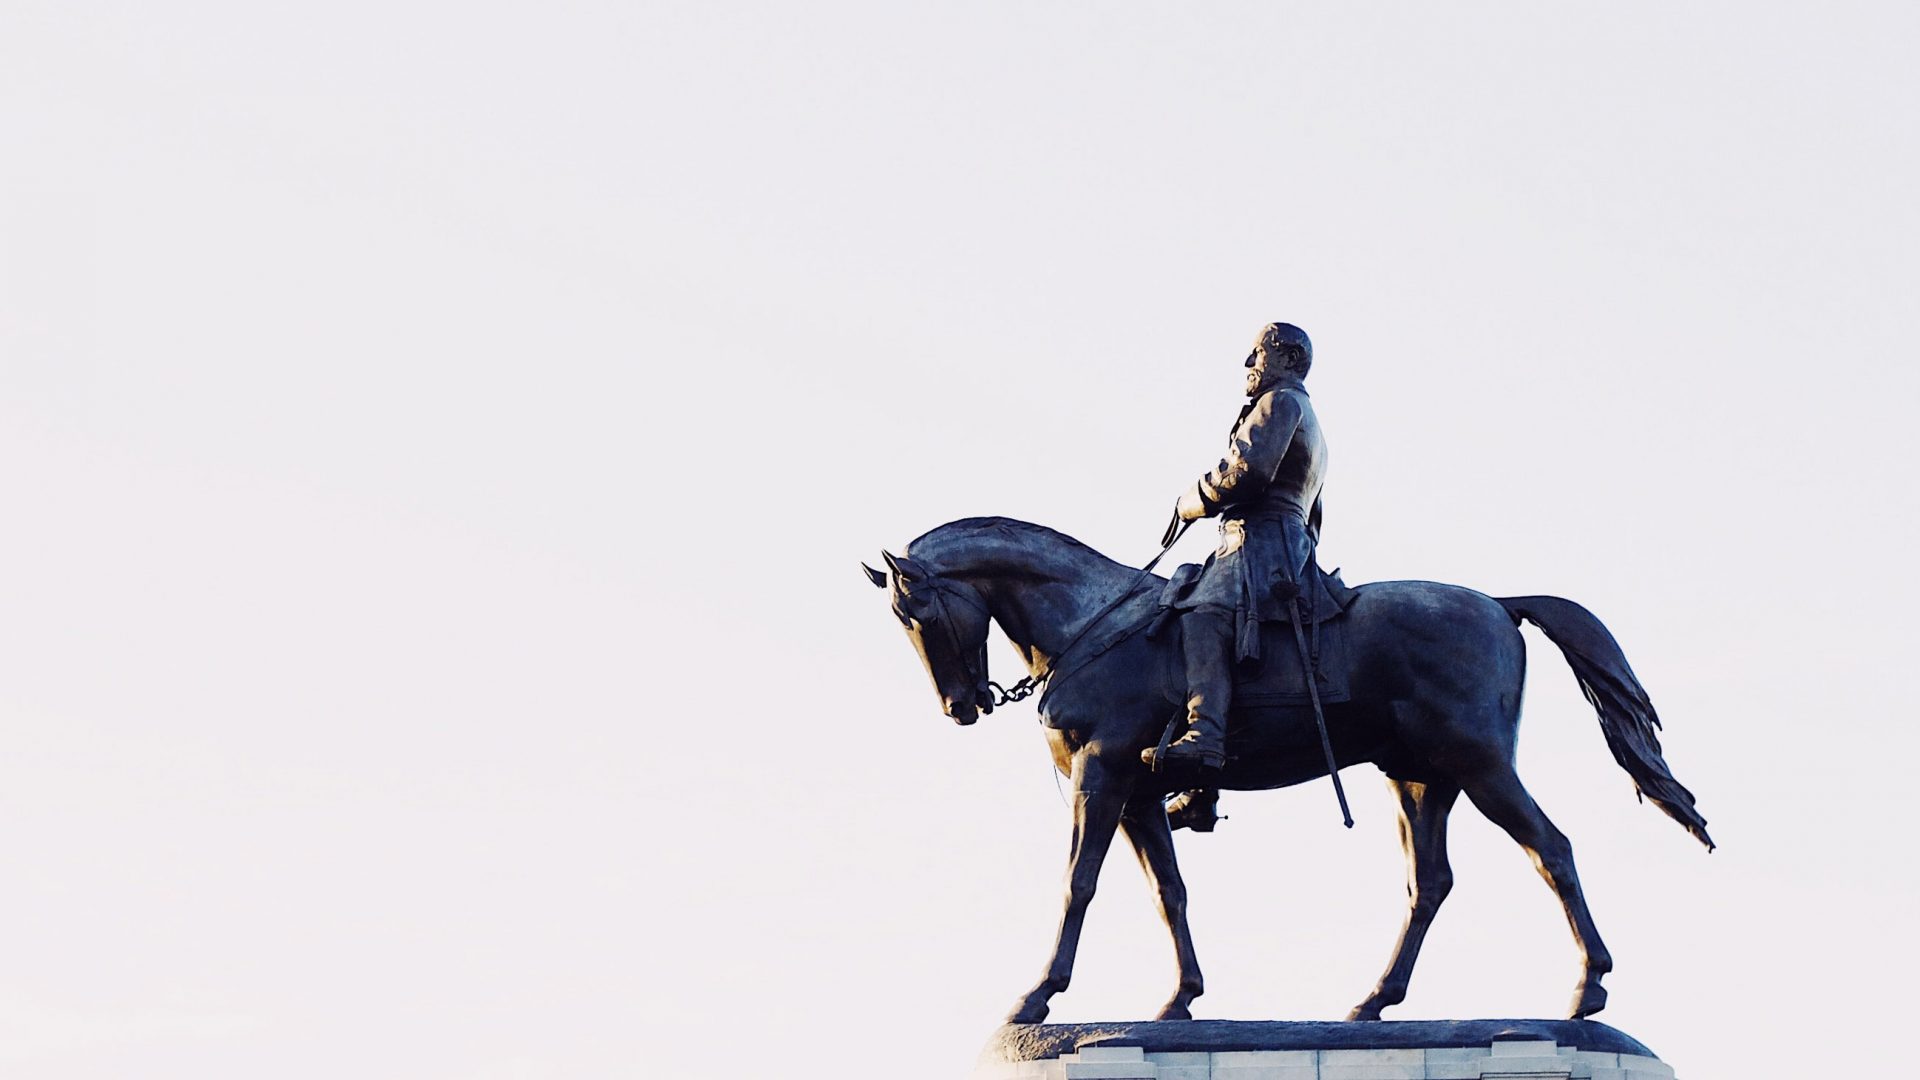 Will we see more monuments of people of color as Confederate statues make an exit?